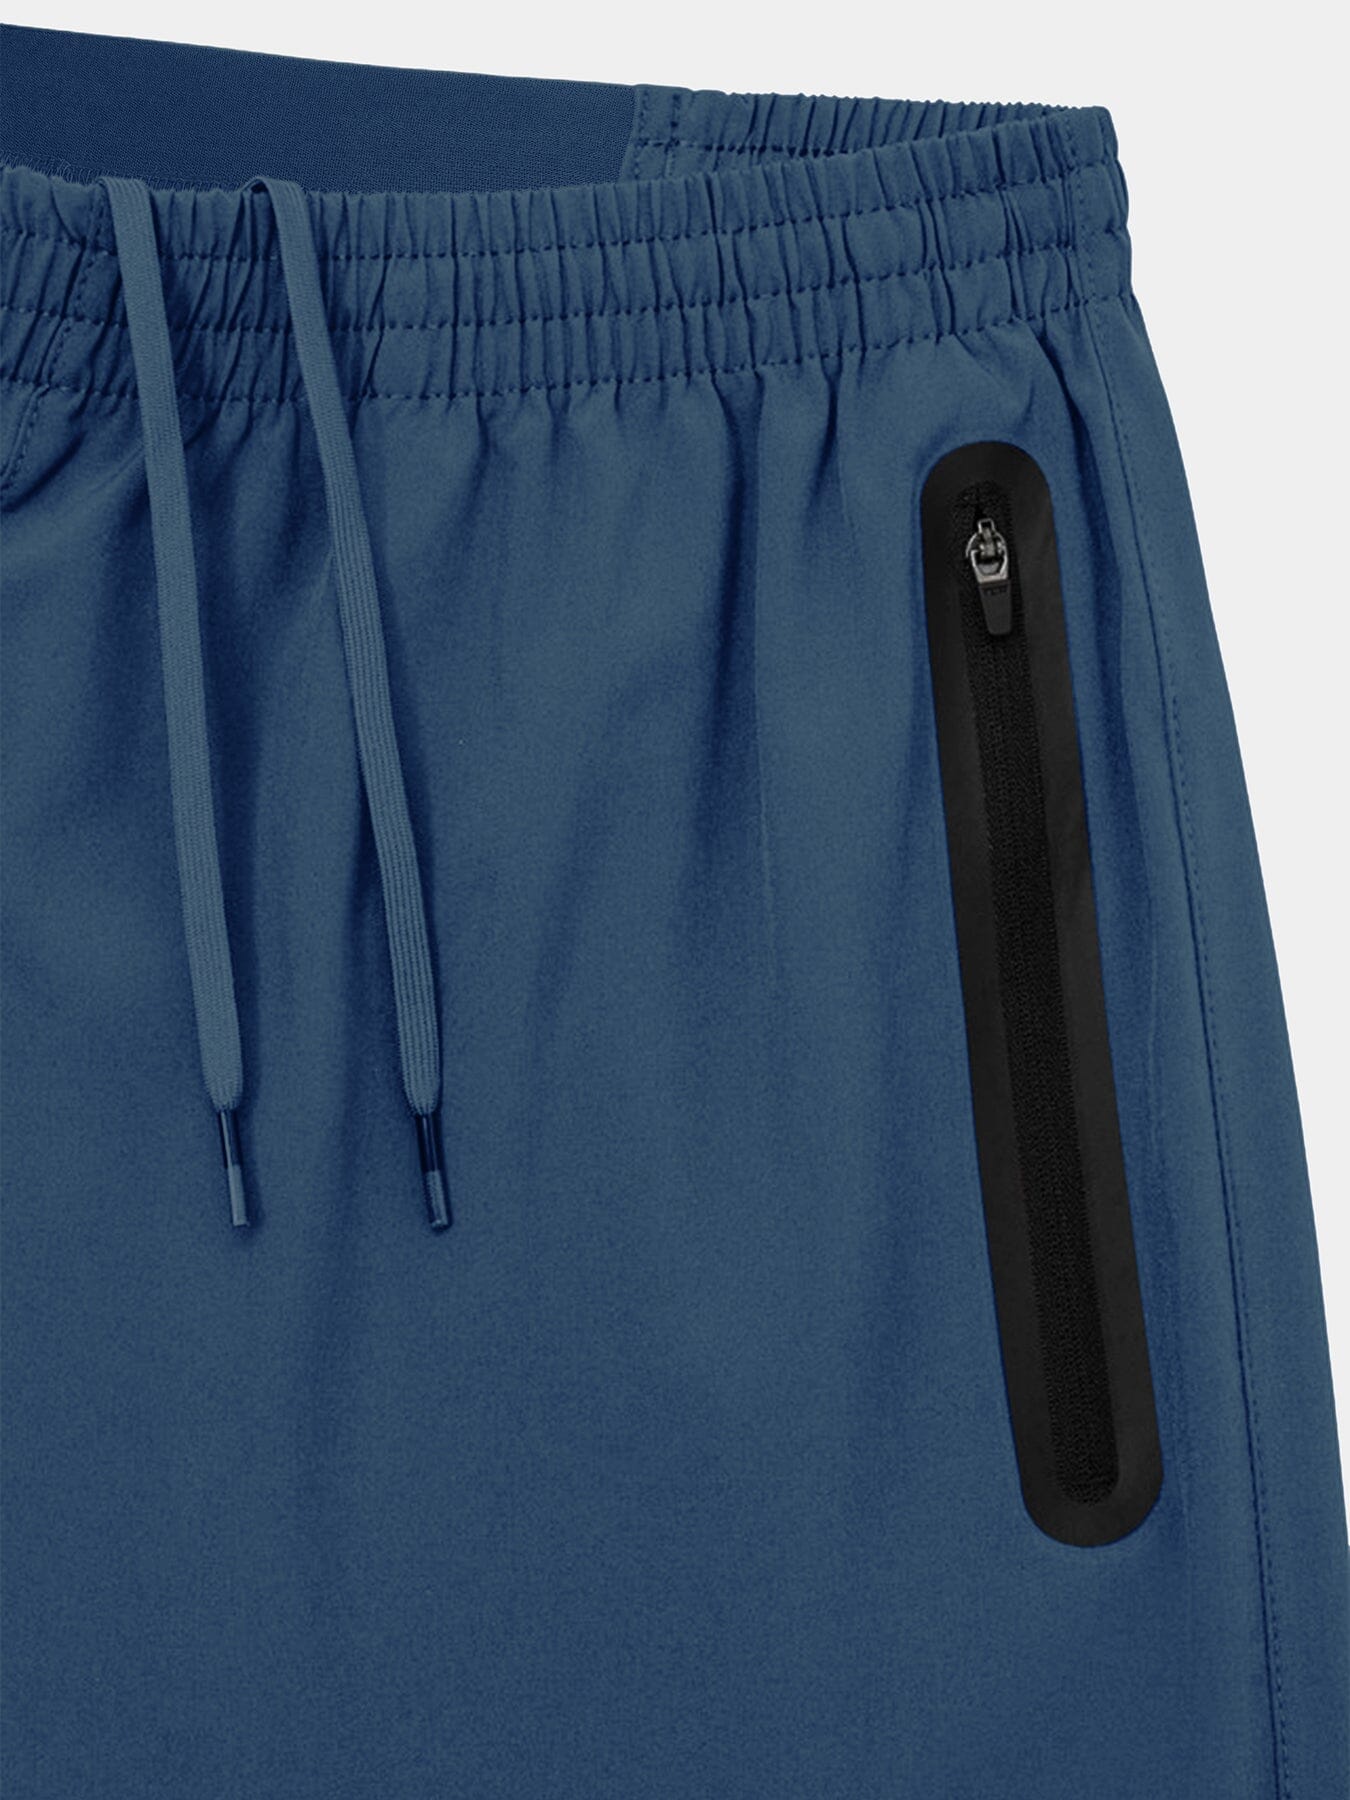 Elite Tech Gym Running Shorts For Men With Zip Pockets 3.0